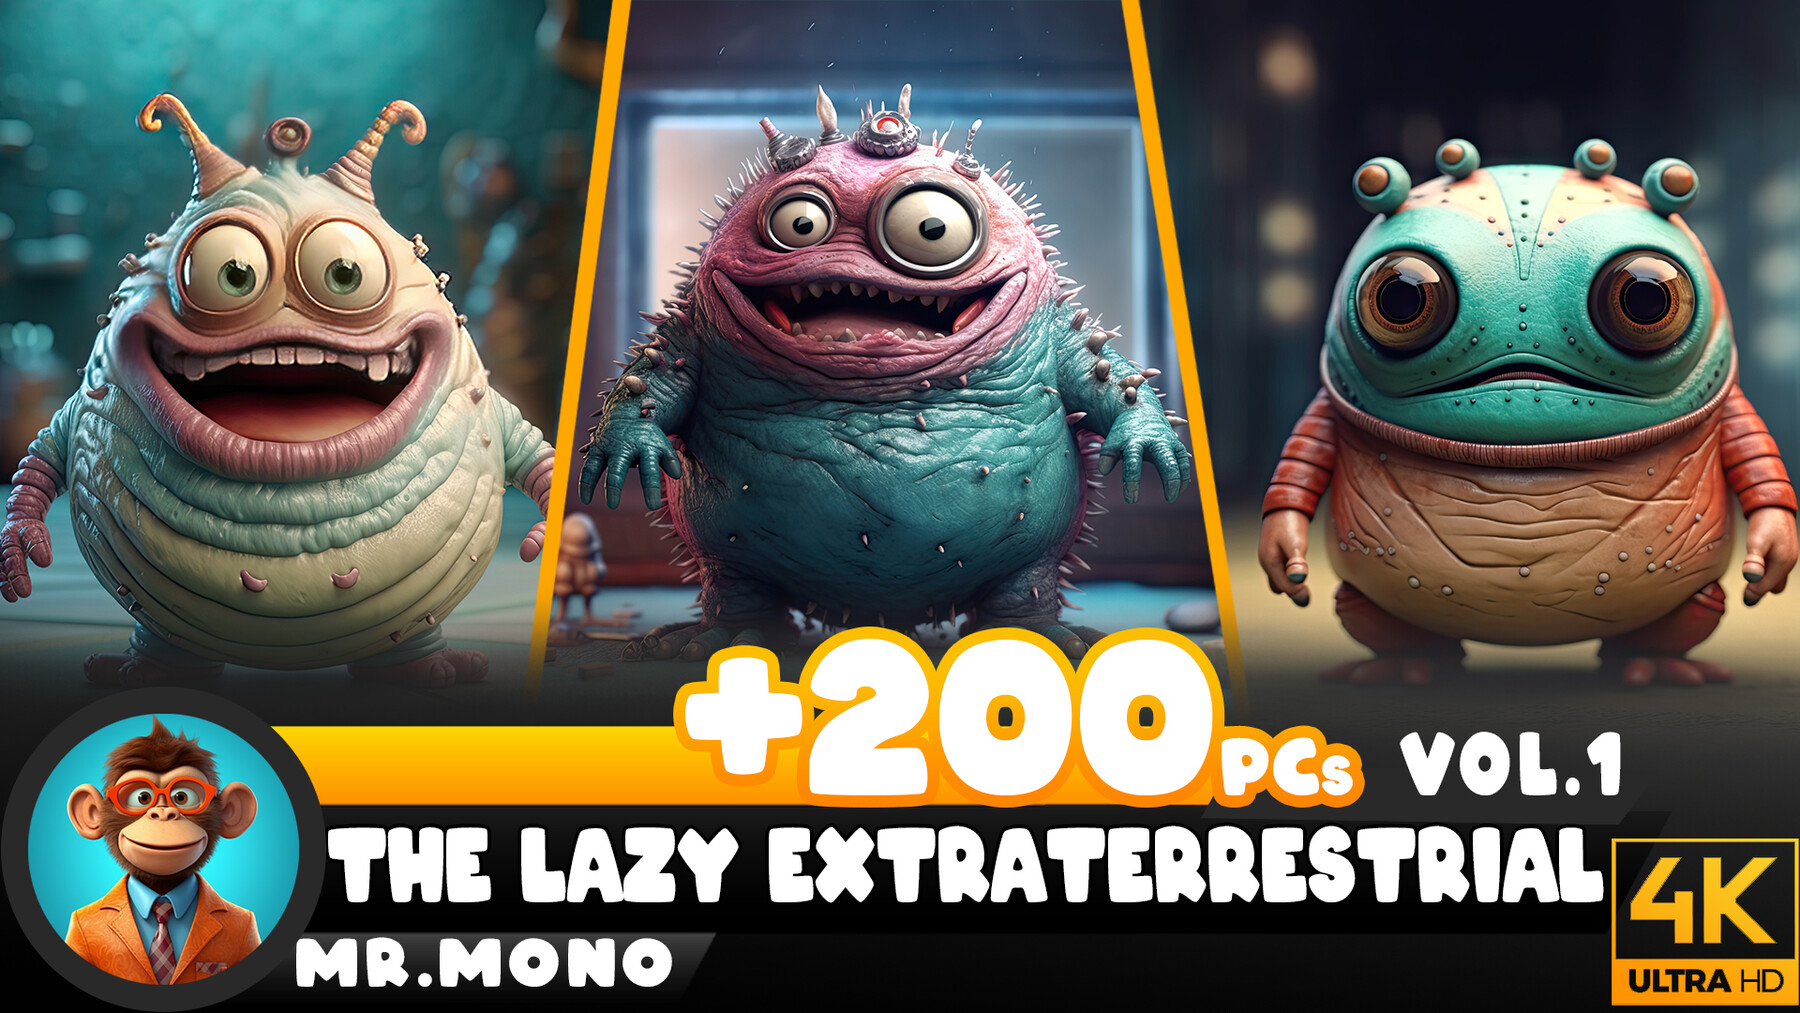 ArtStation - The Lazy Extraterrestrial Vol.1 | Reference Images